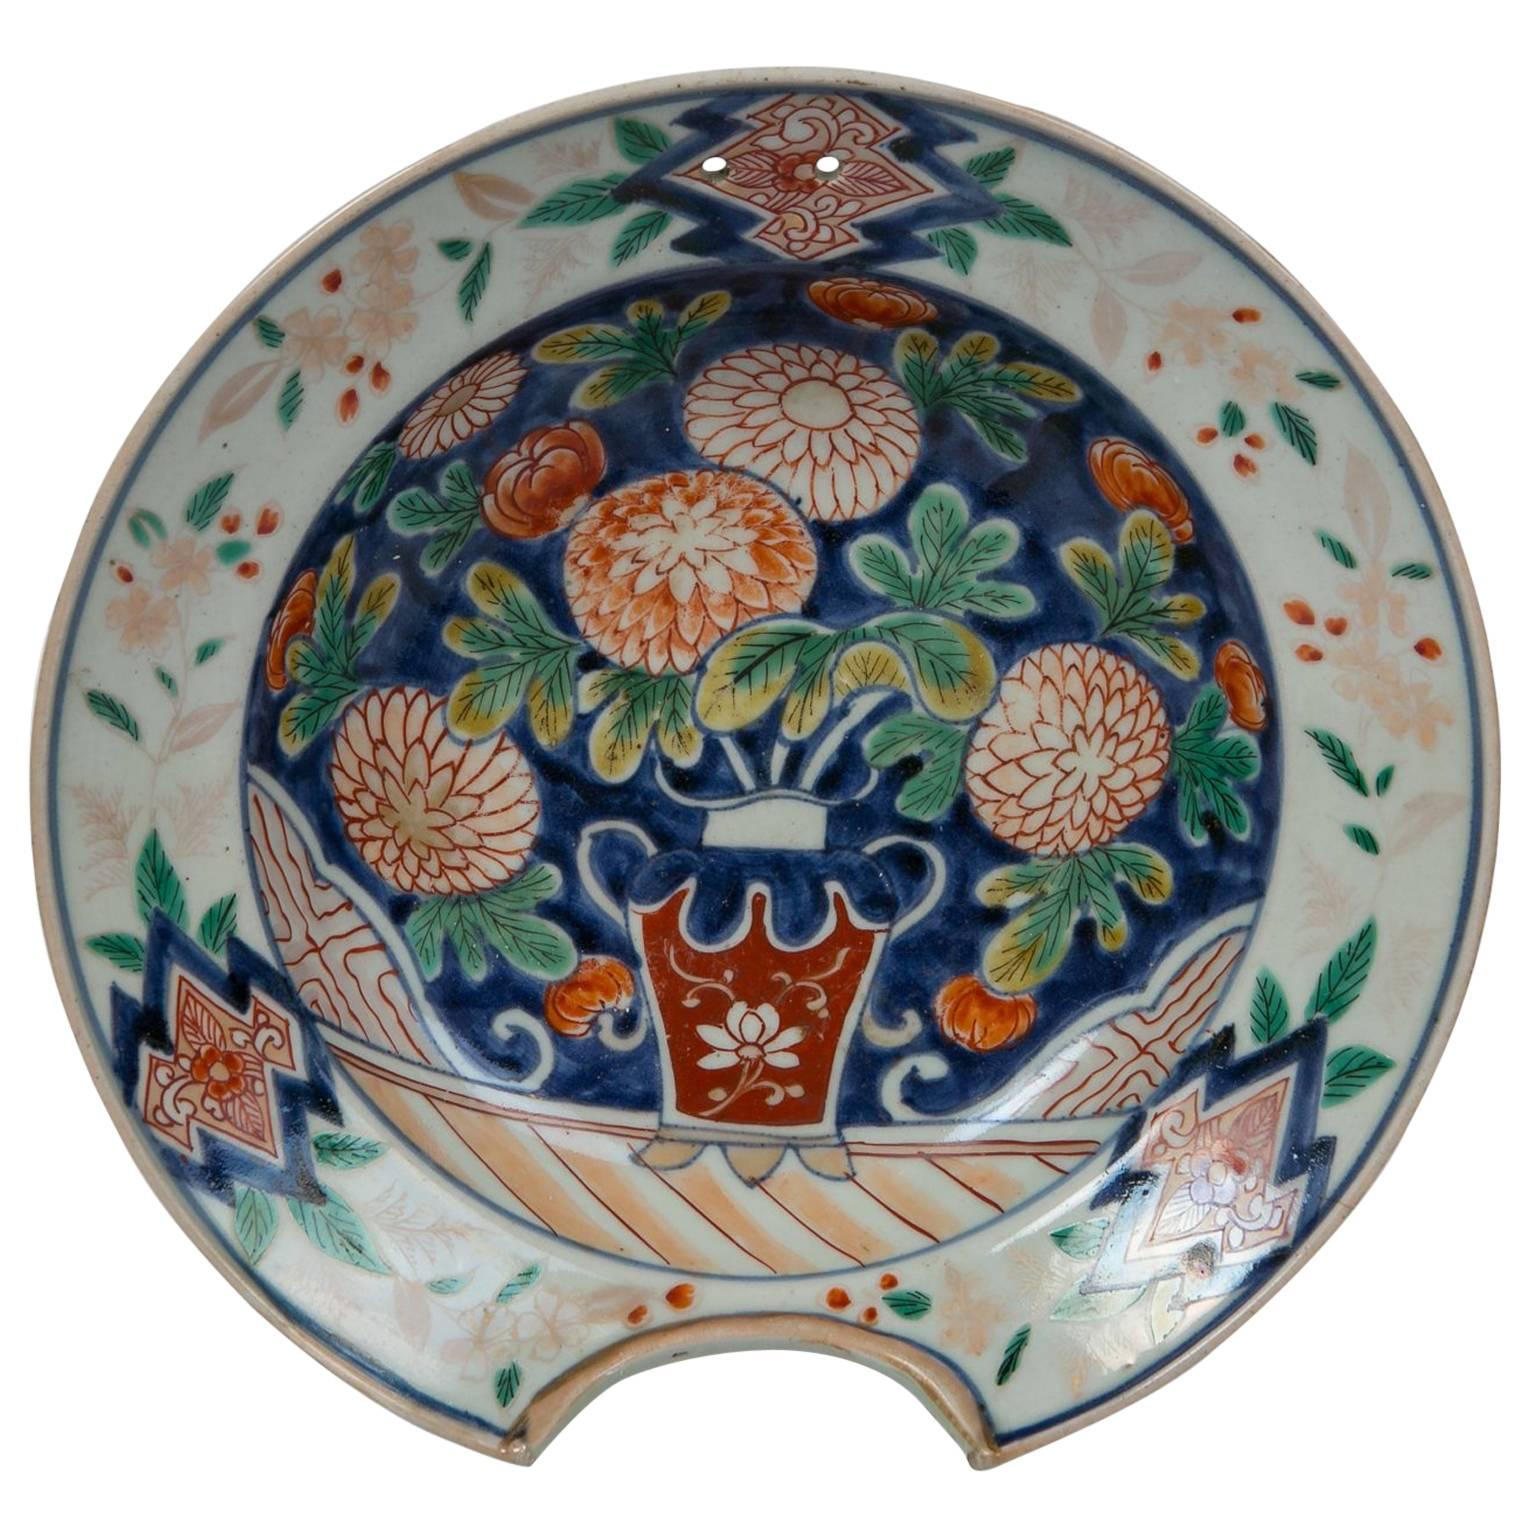 Chinese Porcelain Bowl Made during the Daoguang Period circa 1820